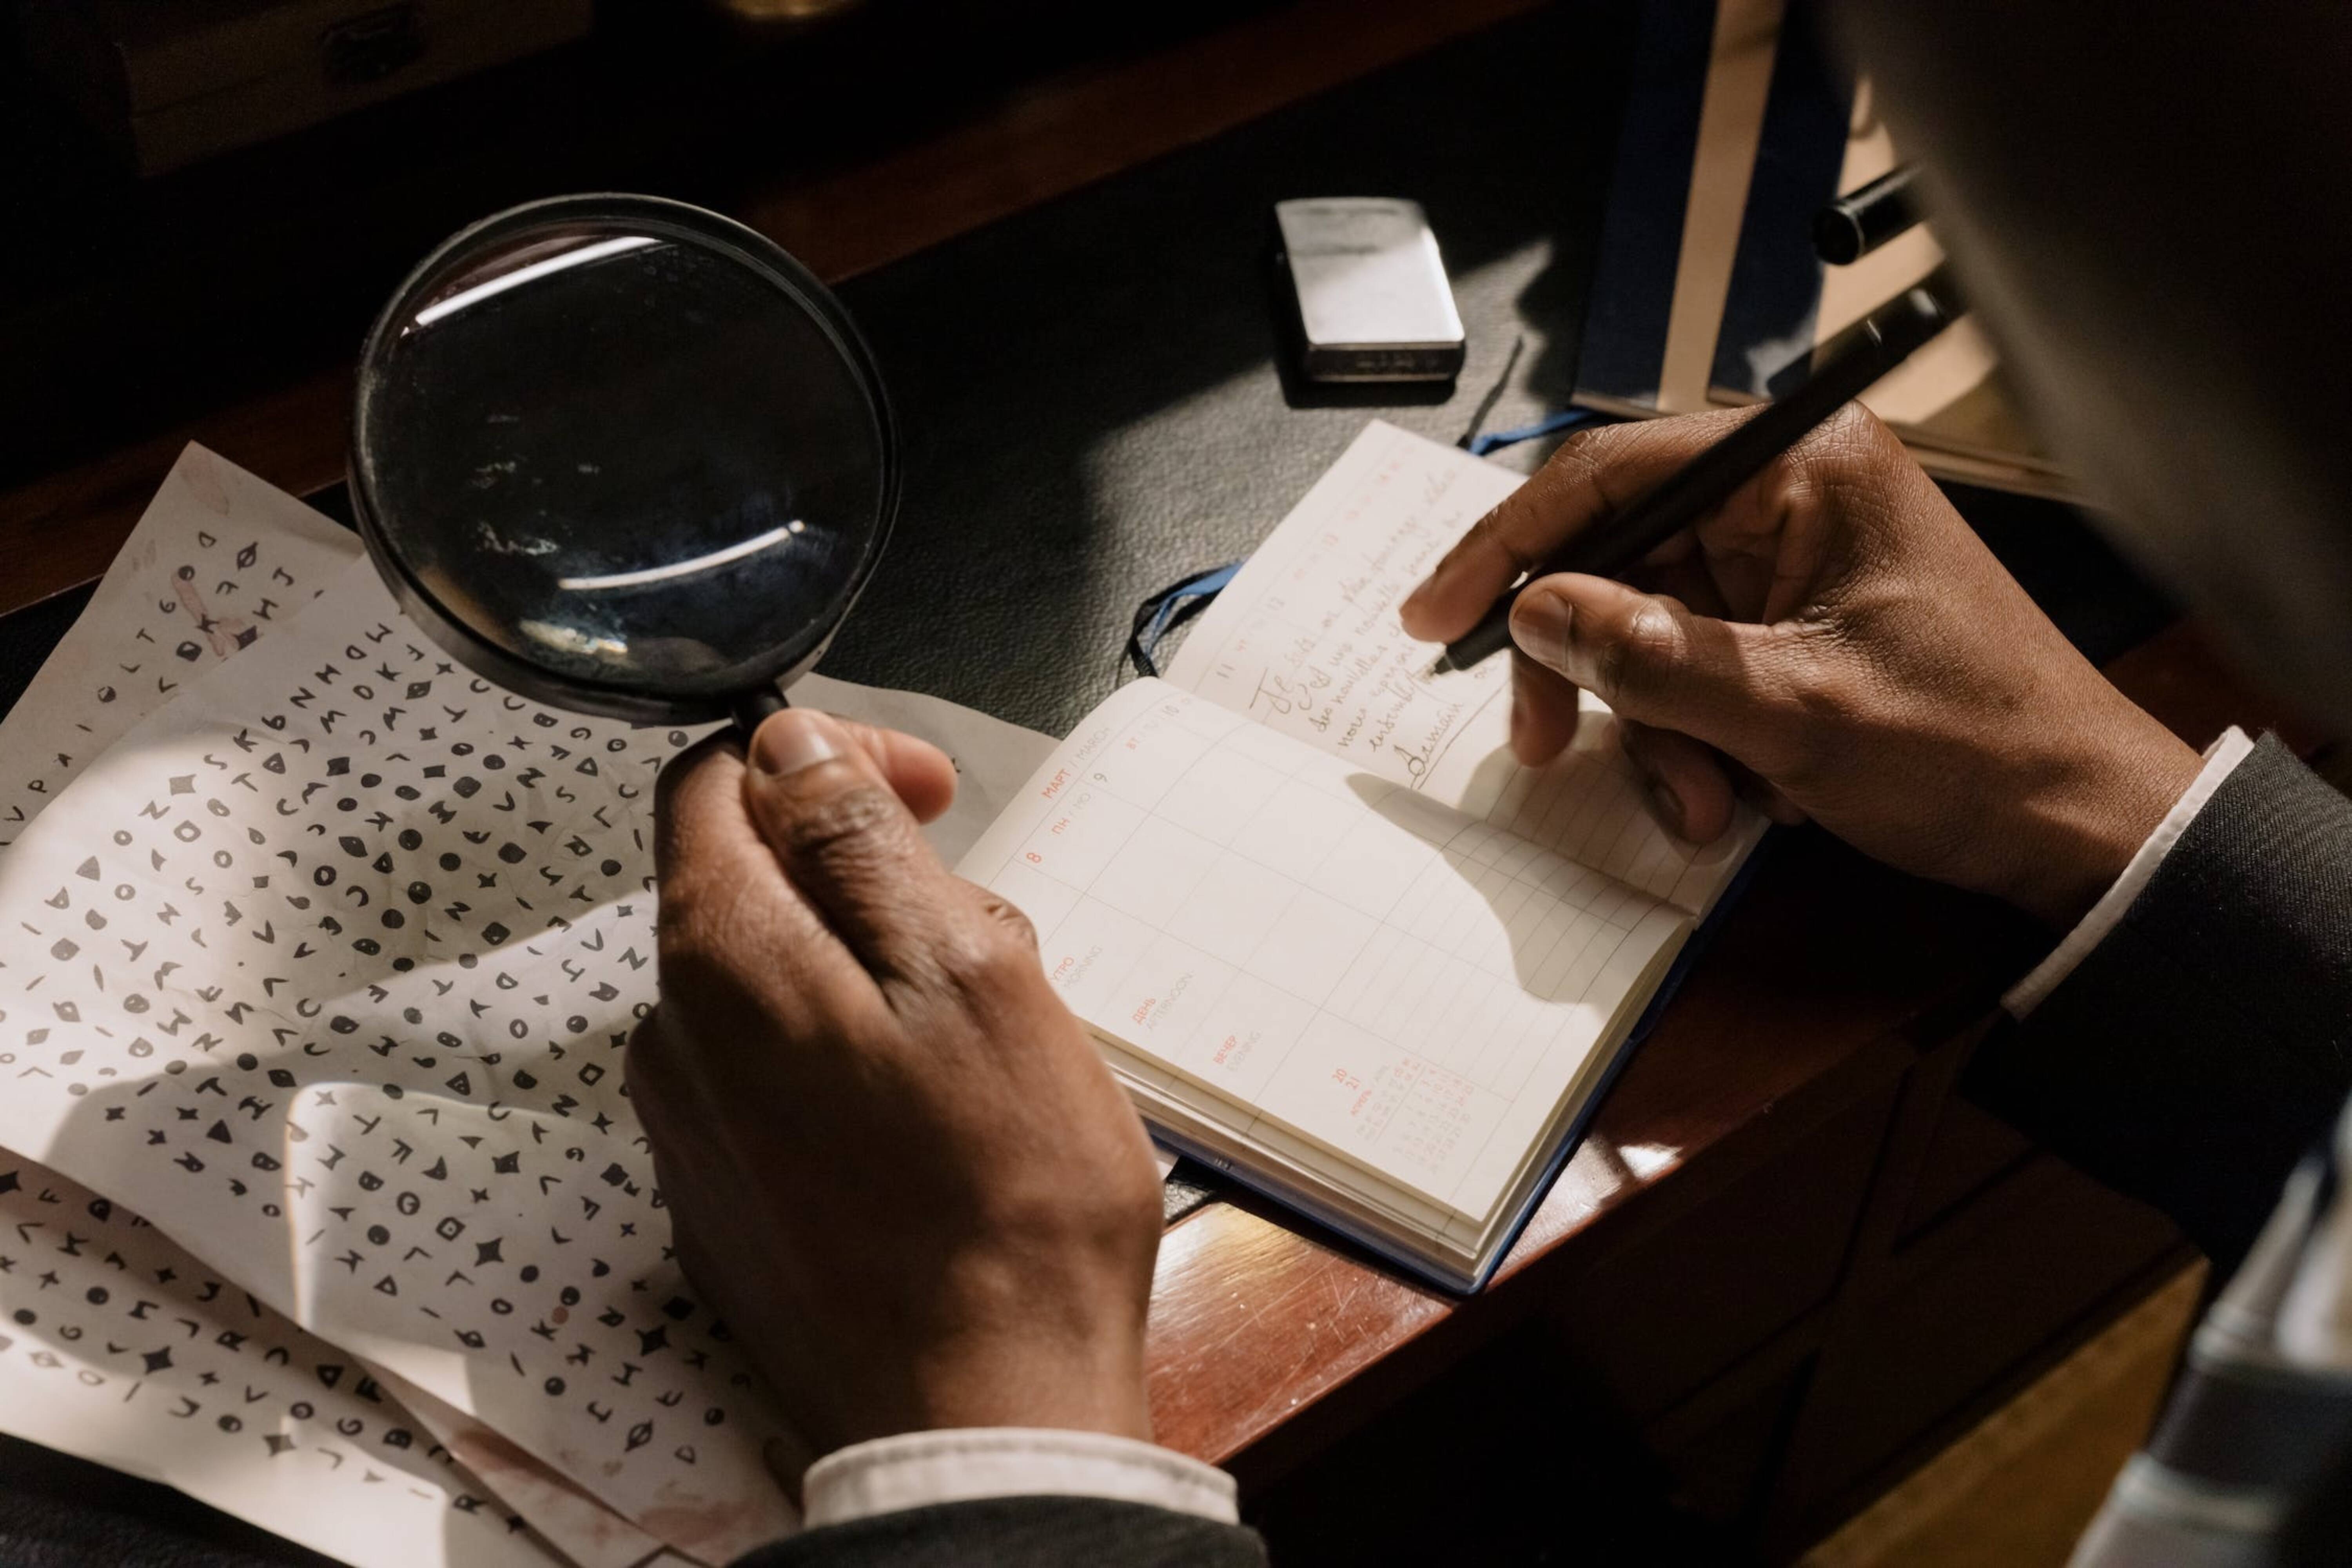 A man holding a magnifying glass and keeping notes.